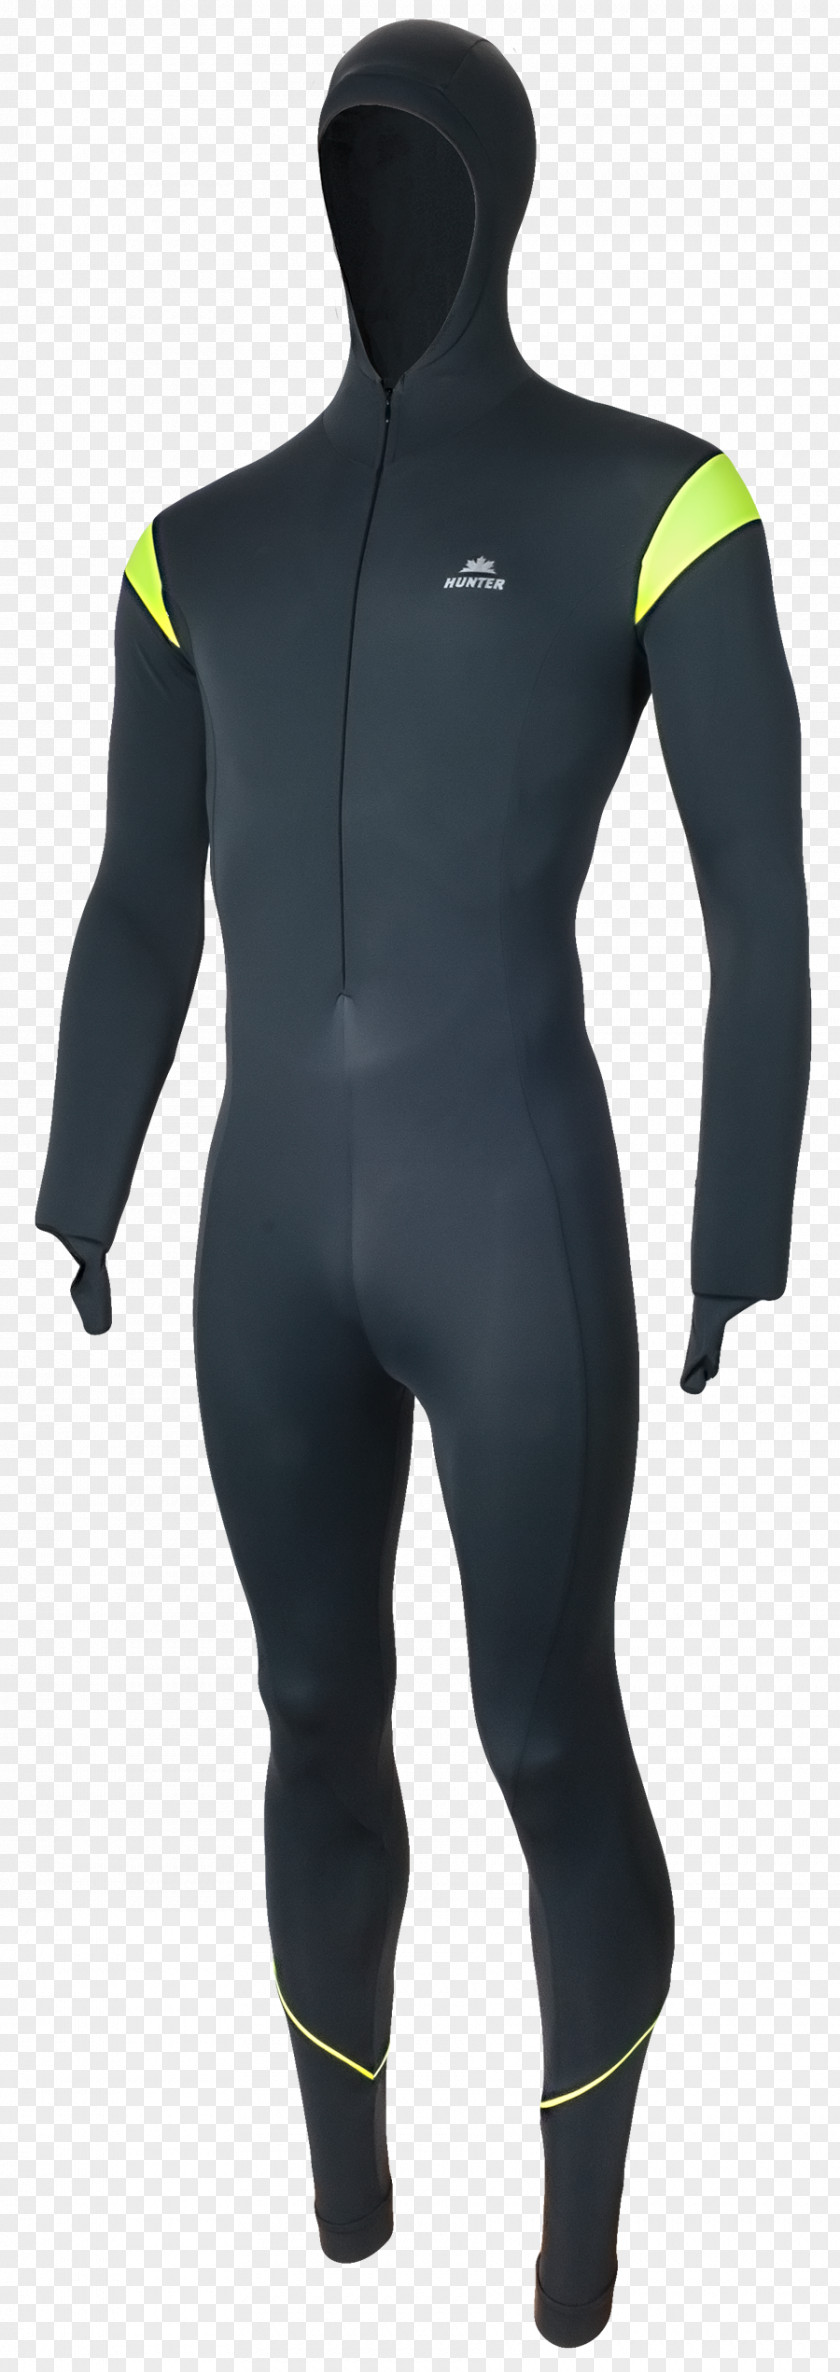 Performance Wetsuit Ice Skating Clothing Sleeve Pants PNG